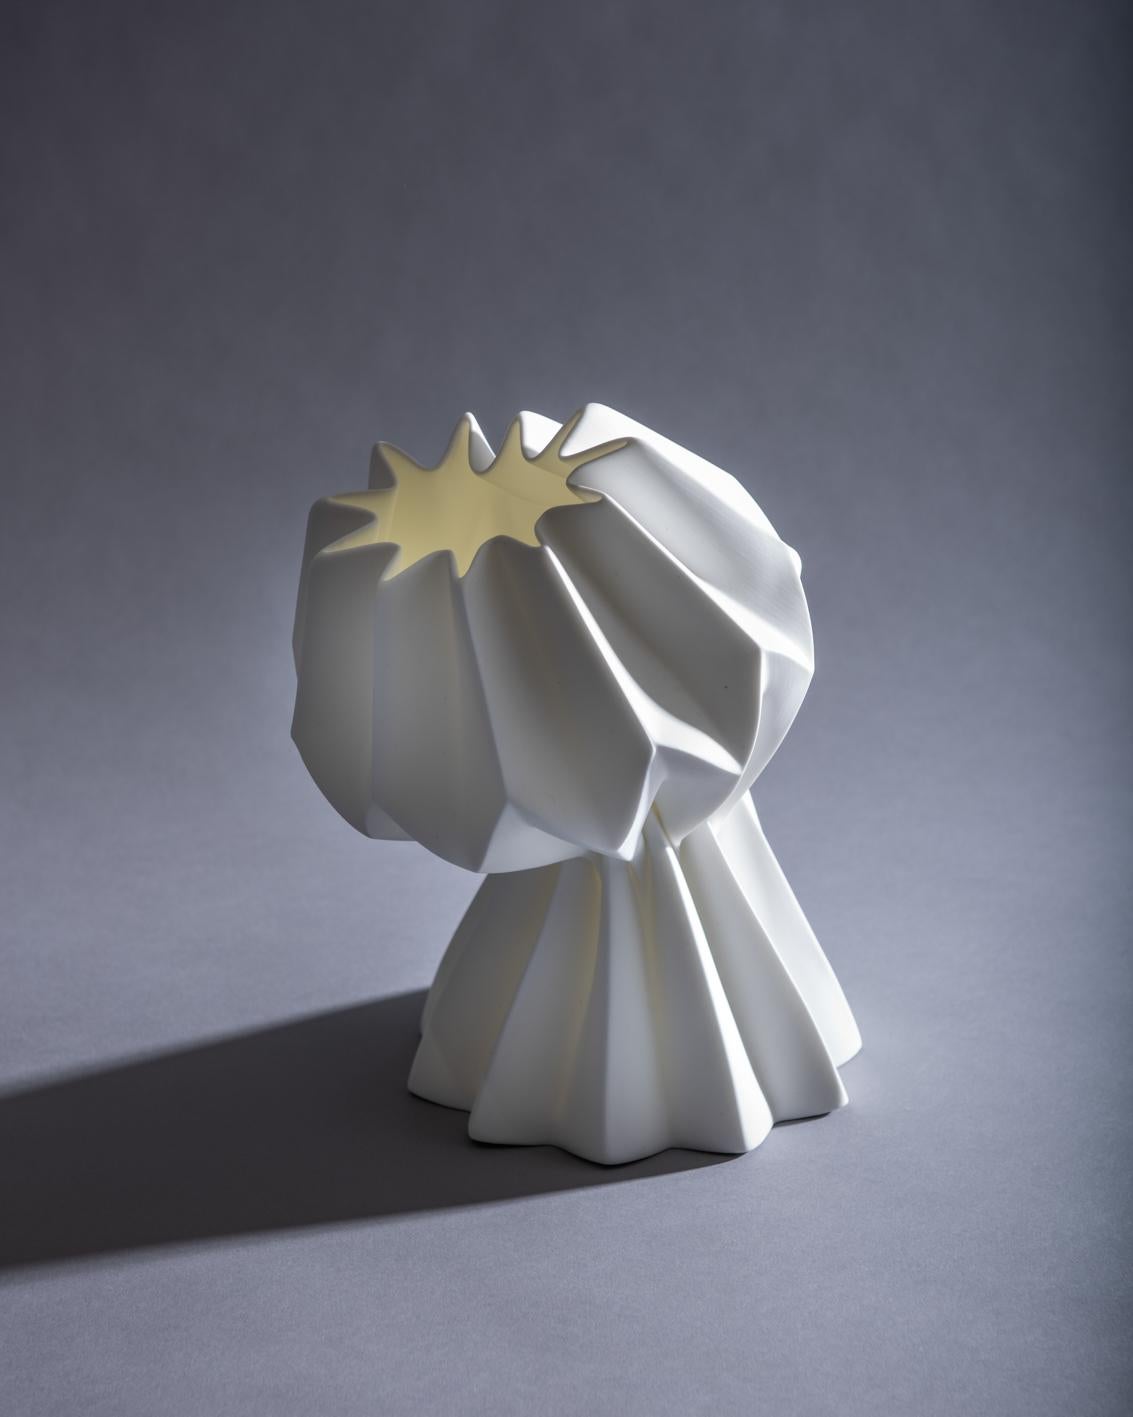 Slump vase – half slump variation – capturing ideas of form, structure and failure; the pleated paper form is translated into a fine bone china that is stressed through the excessive heat of the furnace into a poetic collapse. Developed in the